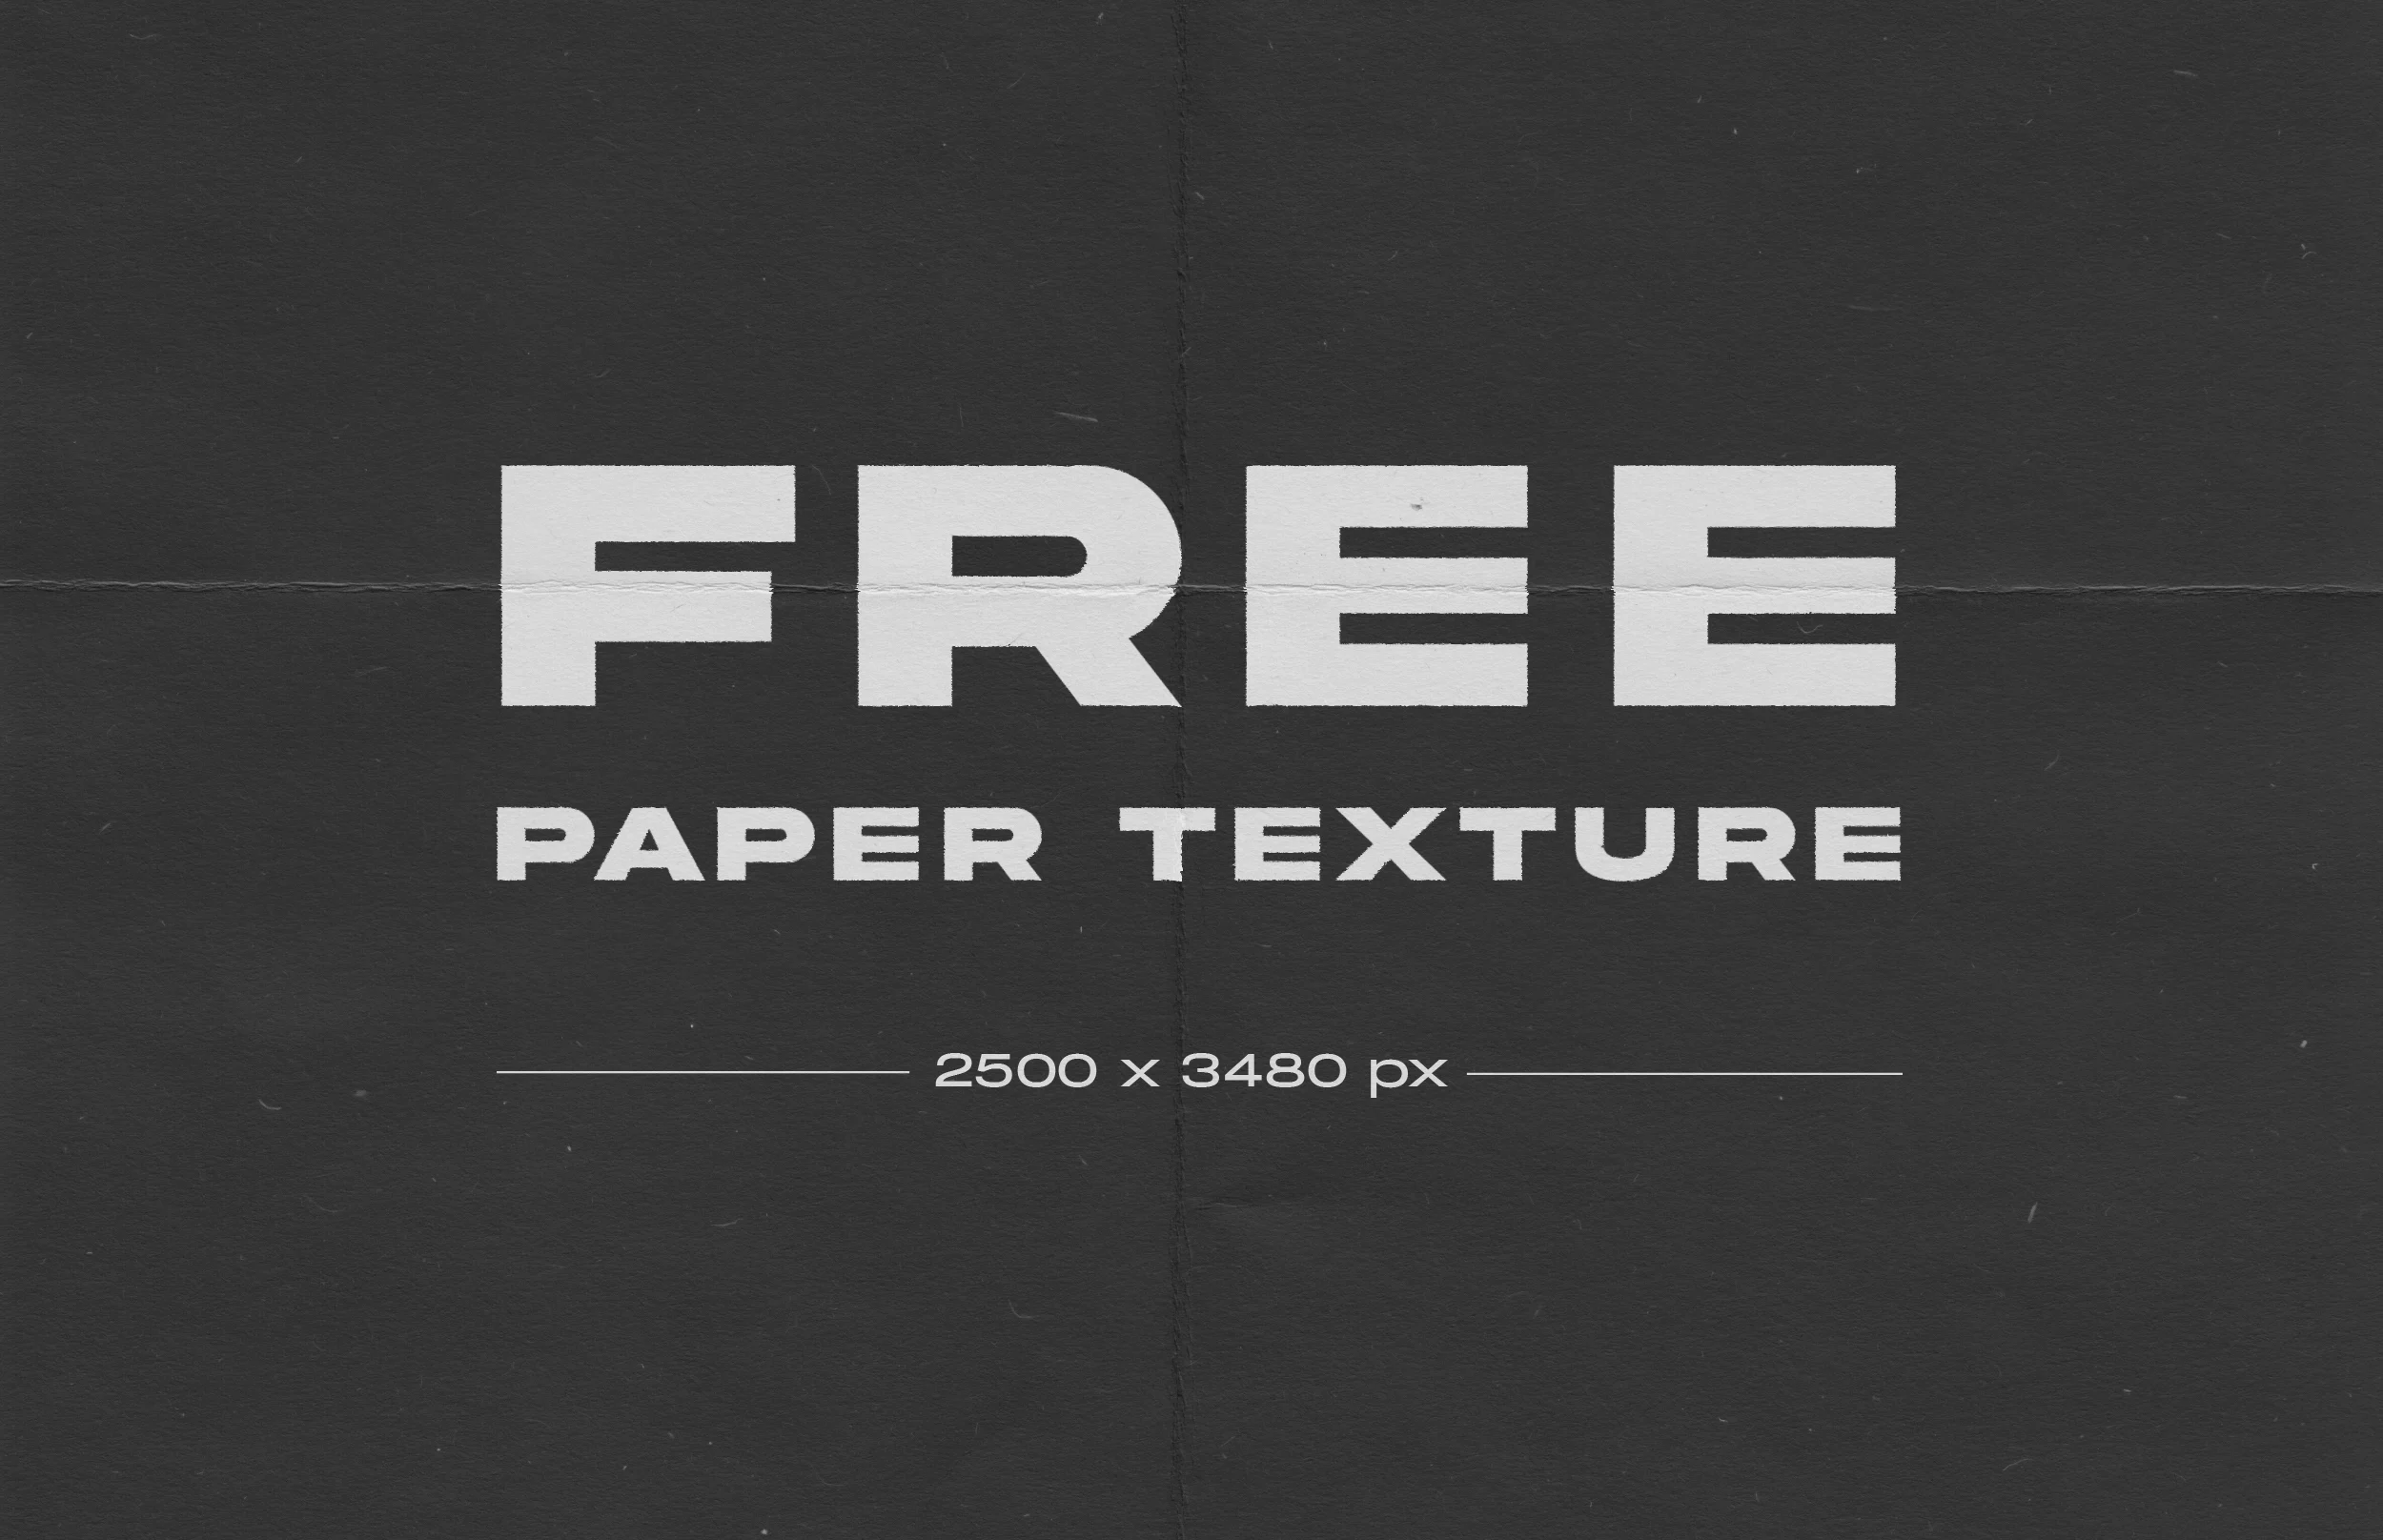 old paper texture black